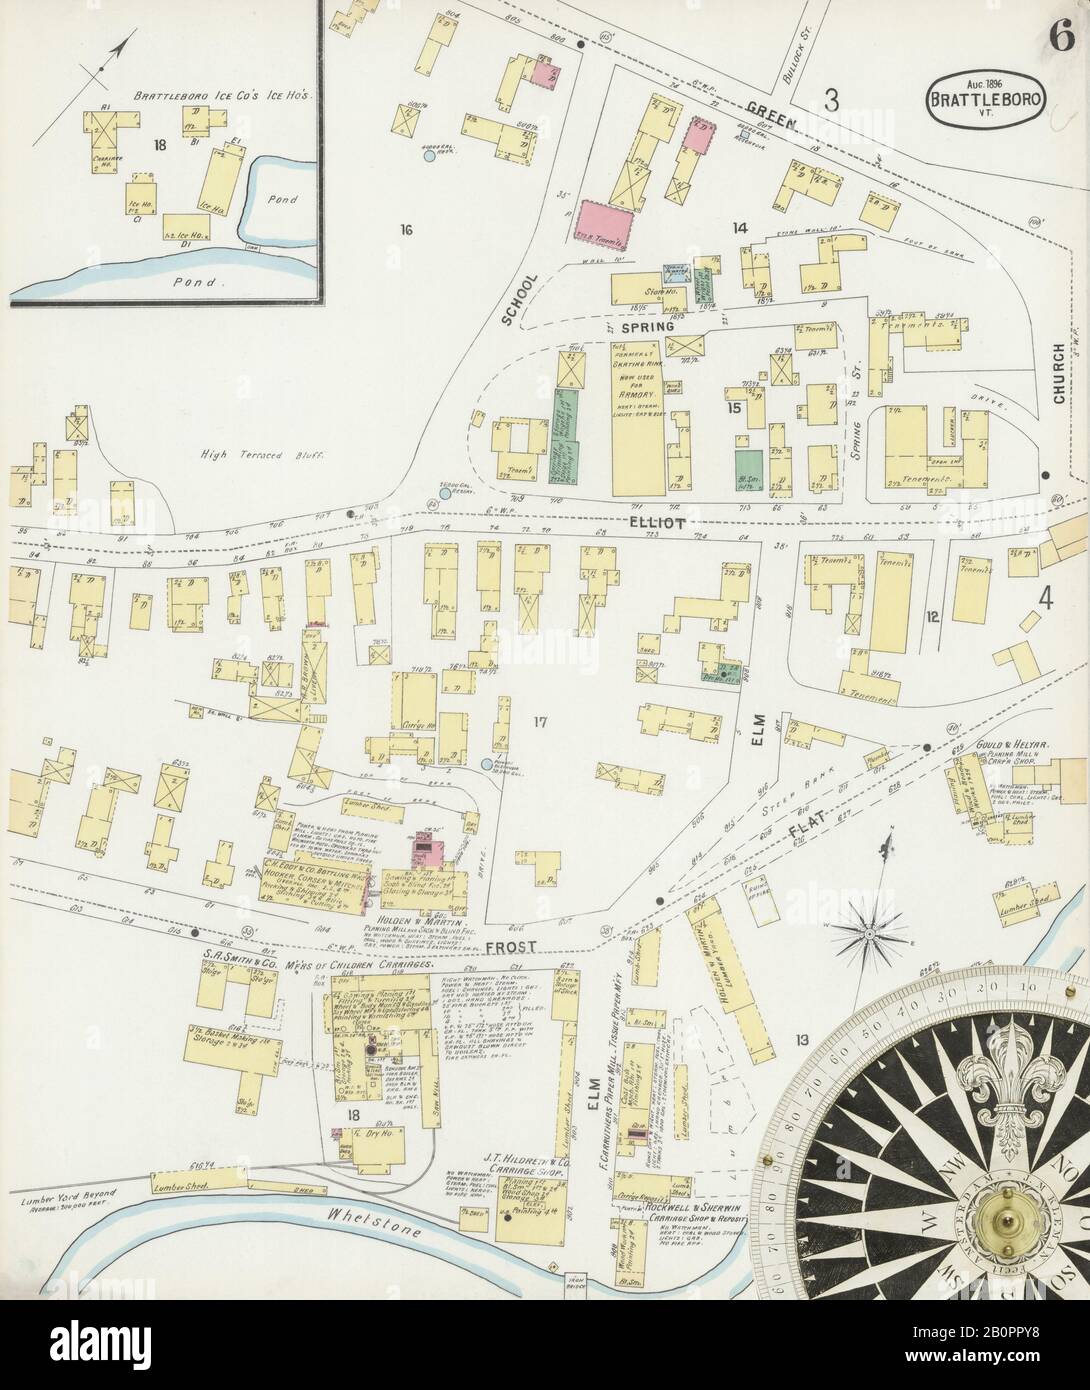 Image 6 of Sanborn Fire Insurance Map from Brattleboro, Windham County, Vermont. Aug 1896. 8 Sheet(s), America, street map with a Nineteenth Century compass Stock Photo